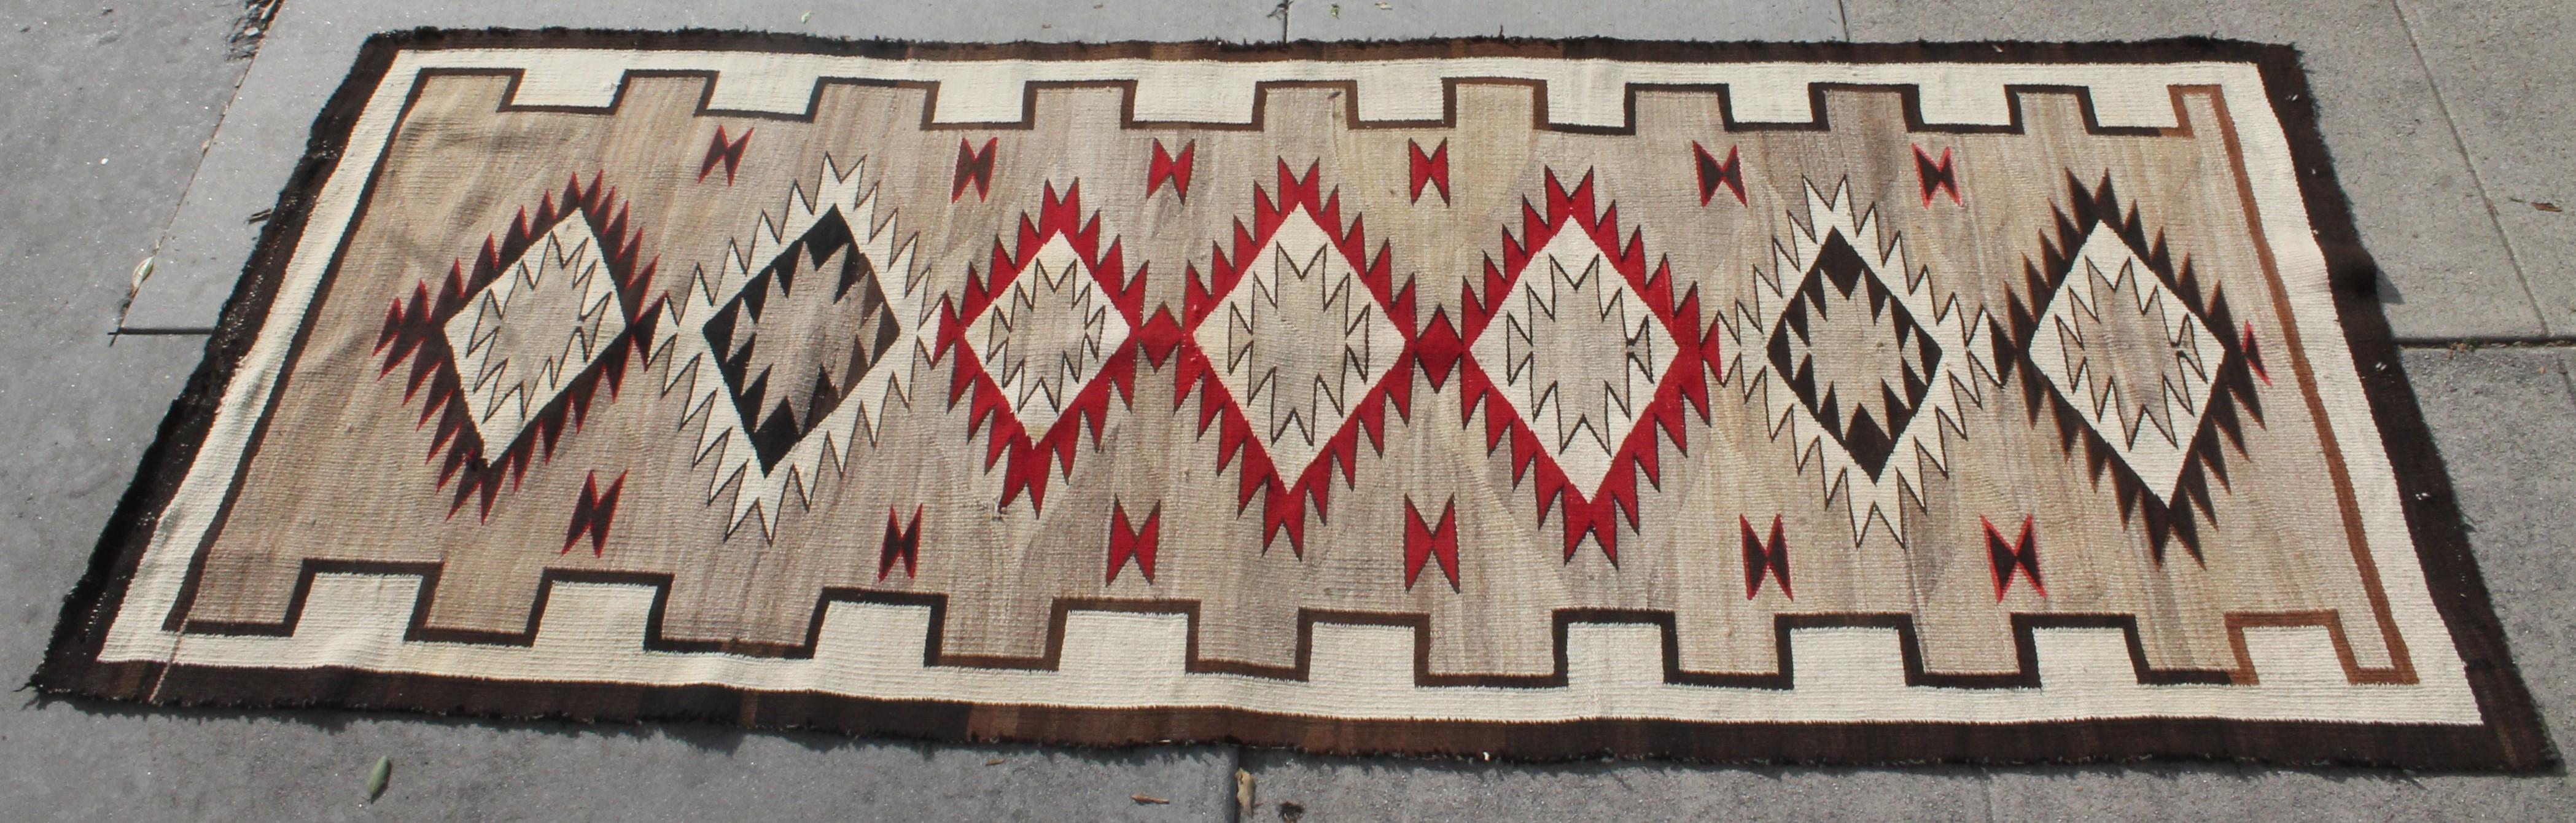 Navajo runner eye dazzler weaving in very good condition. Professionally cleaned and very rare to find Navajo runners of this quality and condition. Minor repair to one edge.